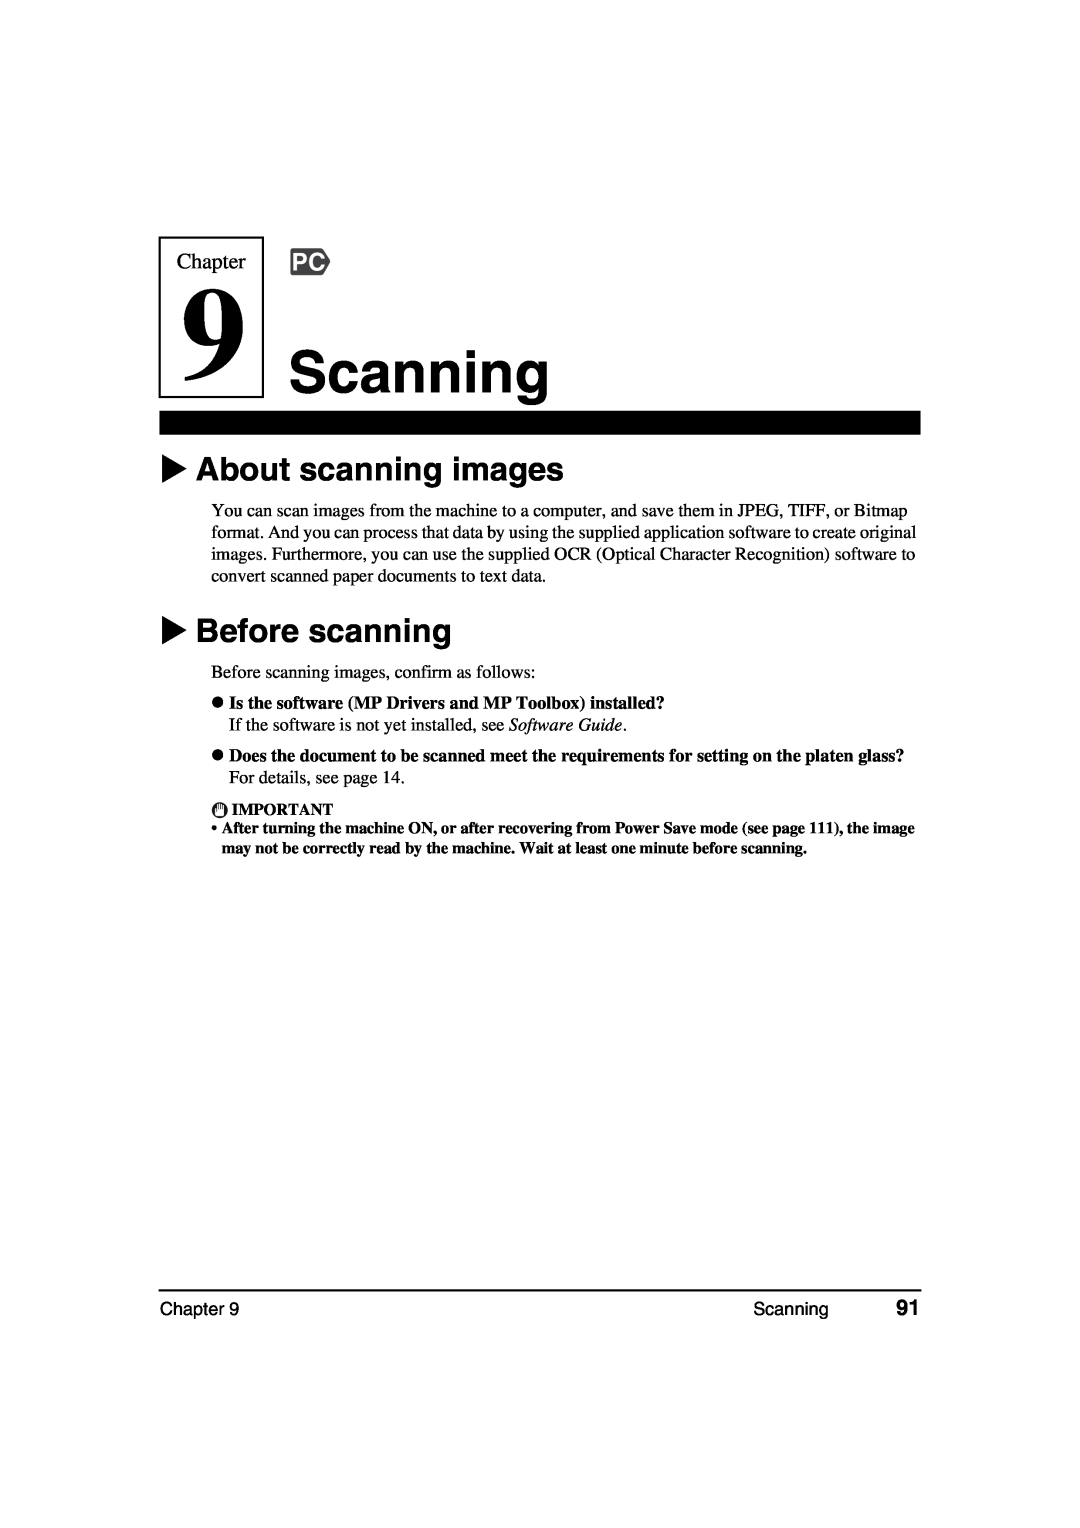 Canon MP370, MP360 manual Scanning, About scanning images, Before scanning, Chapter 